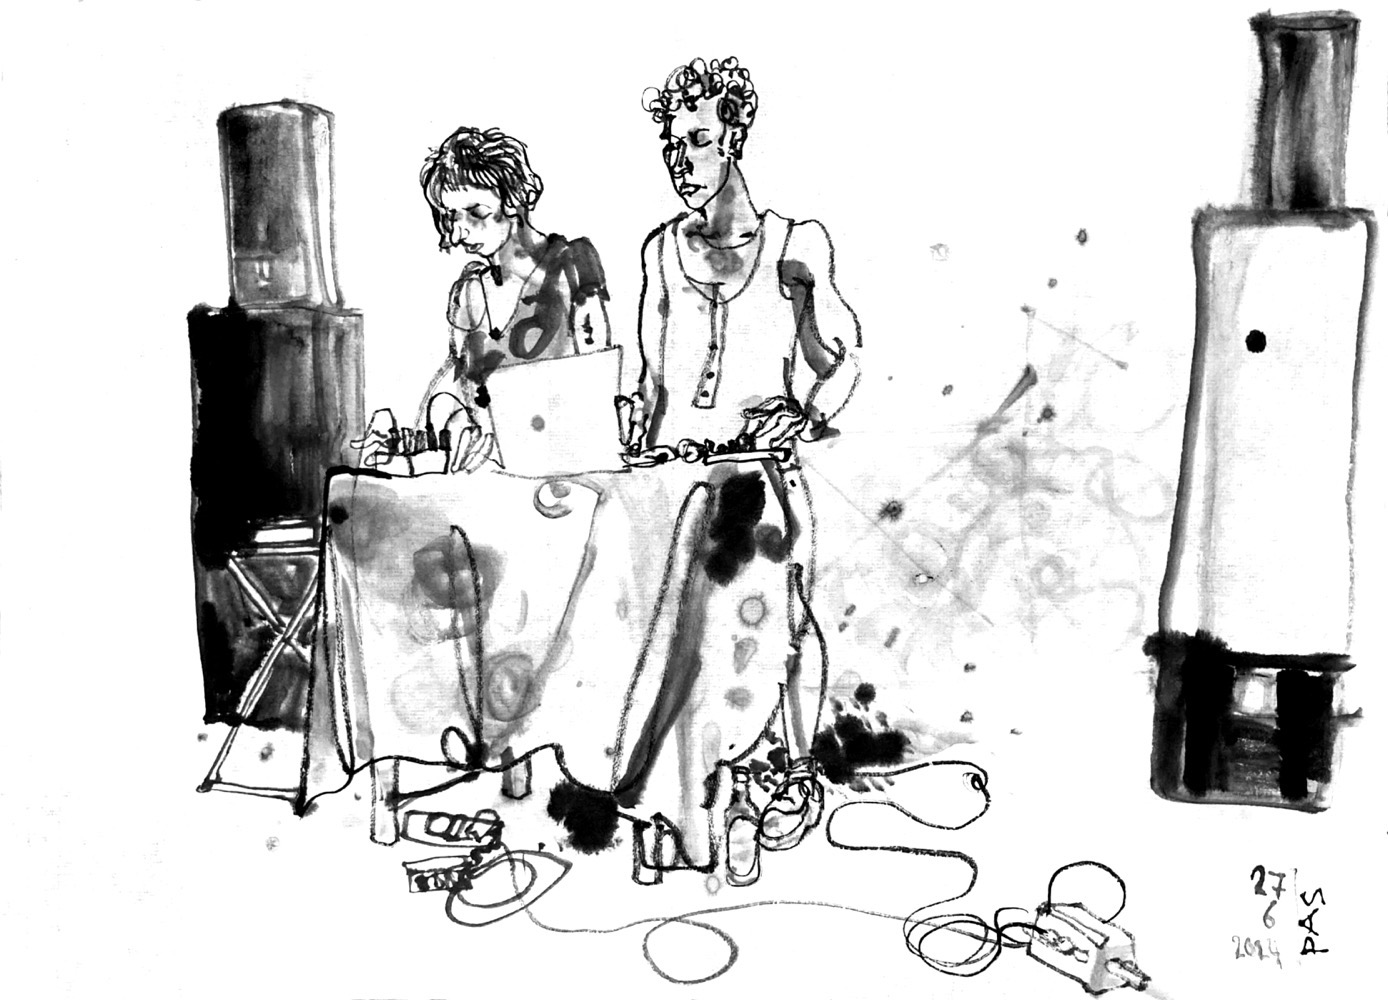 Ink draeing of two musicians, a woman and a man, standing at a desk with electronic devices between loudspeakers.